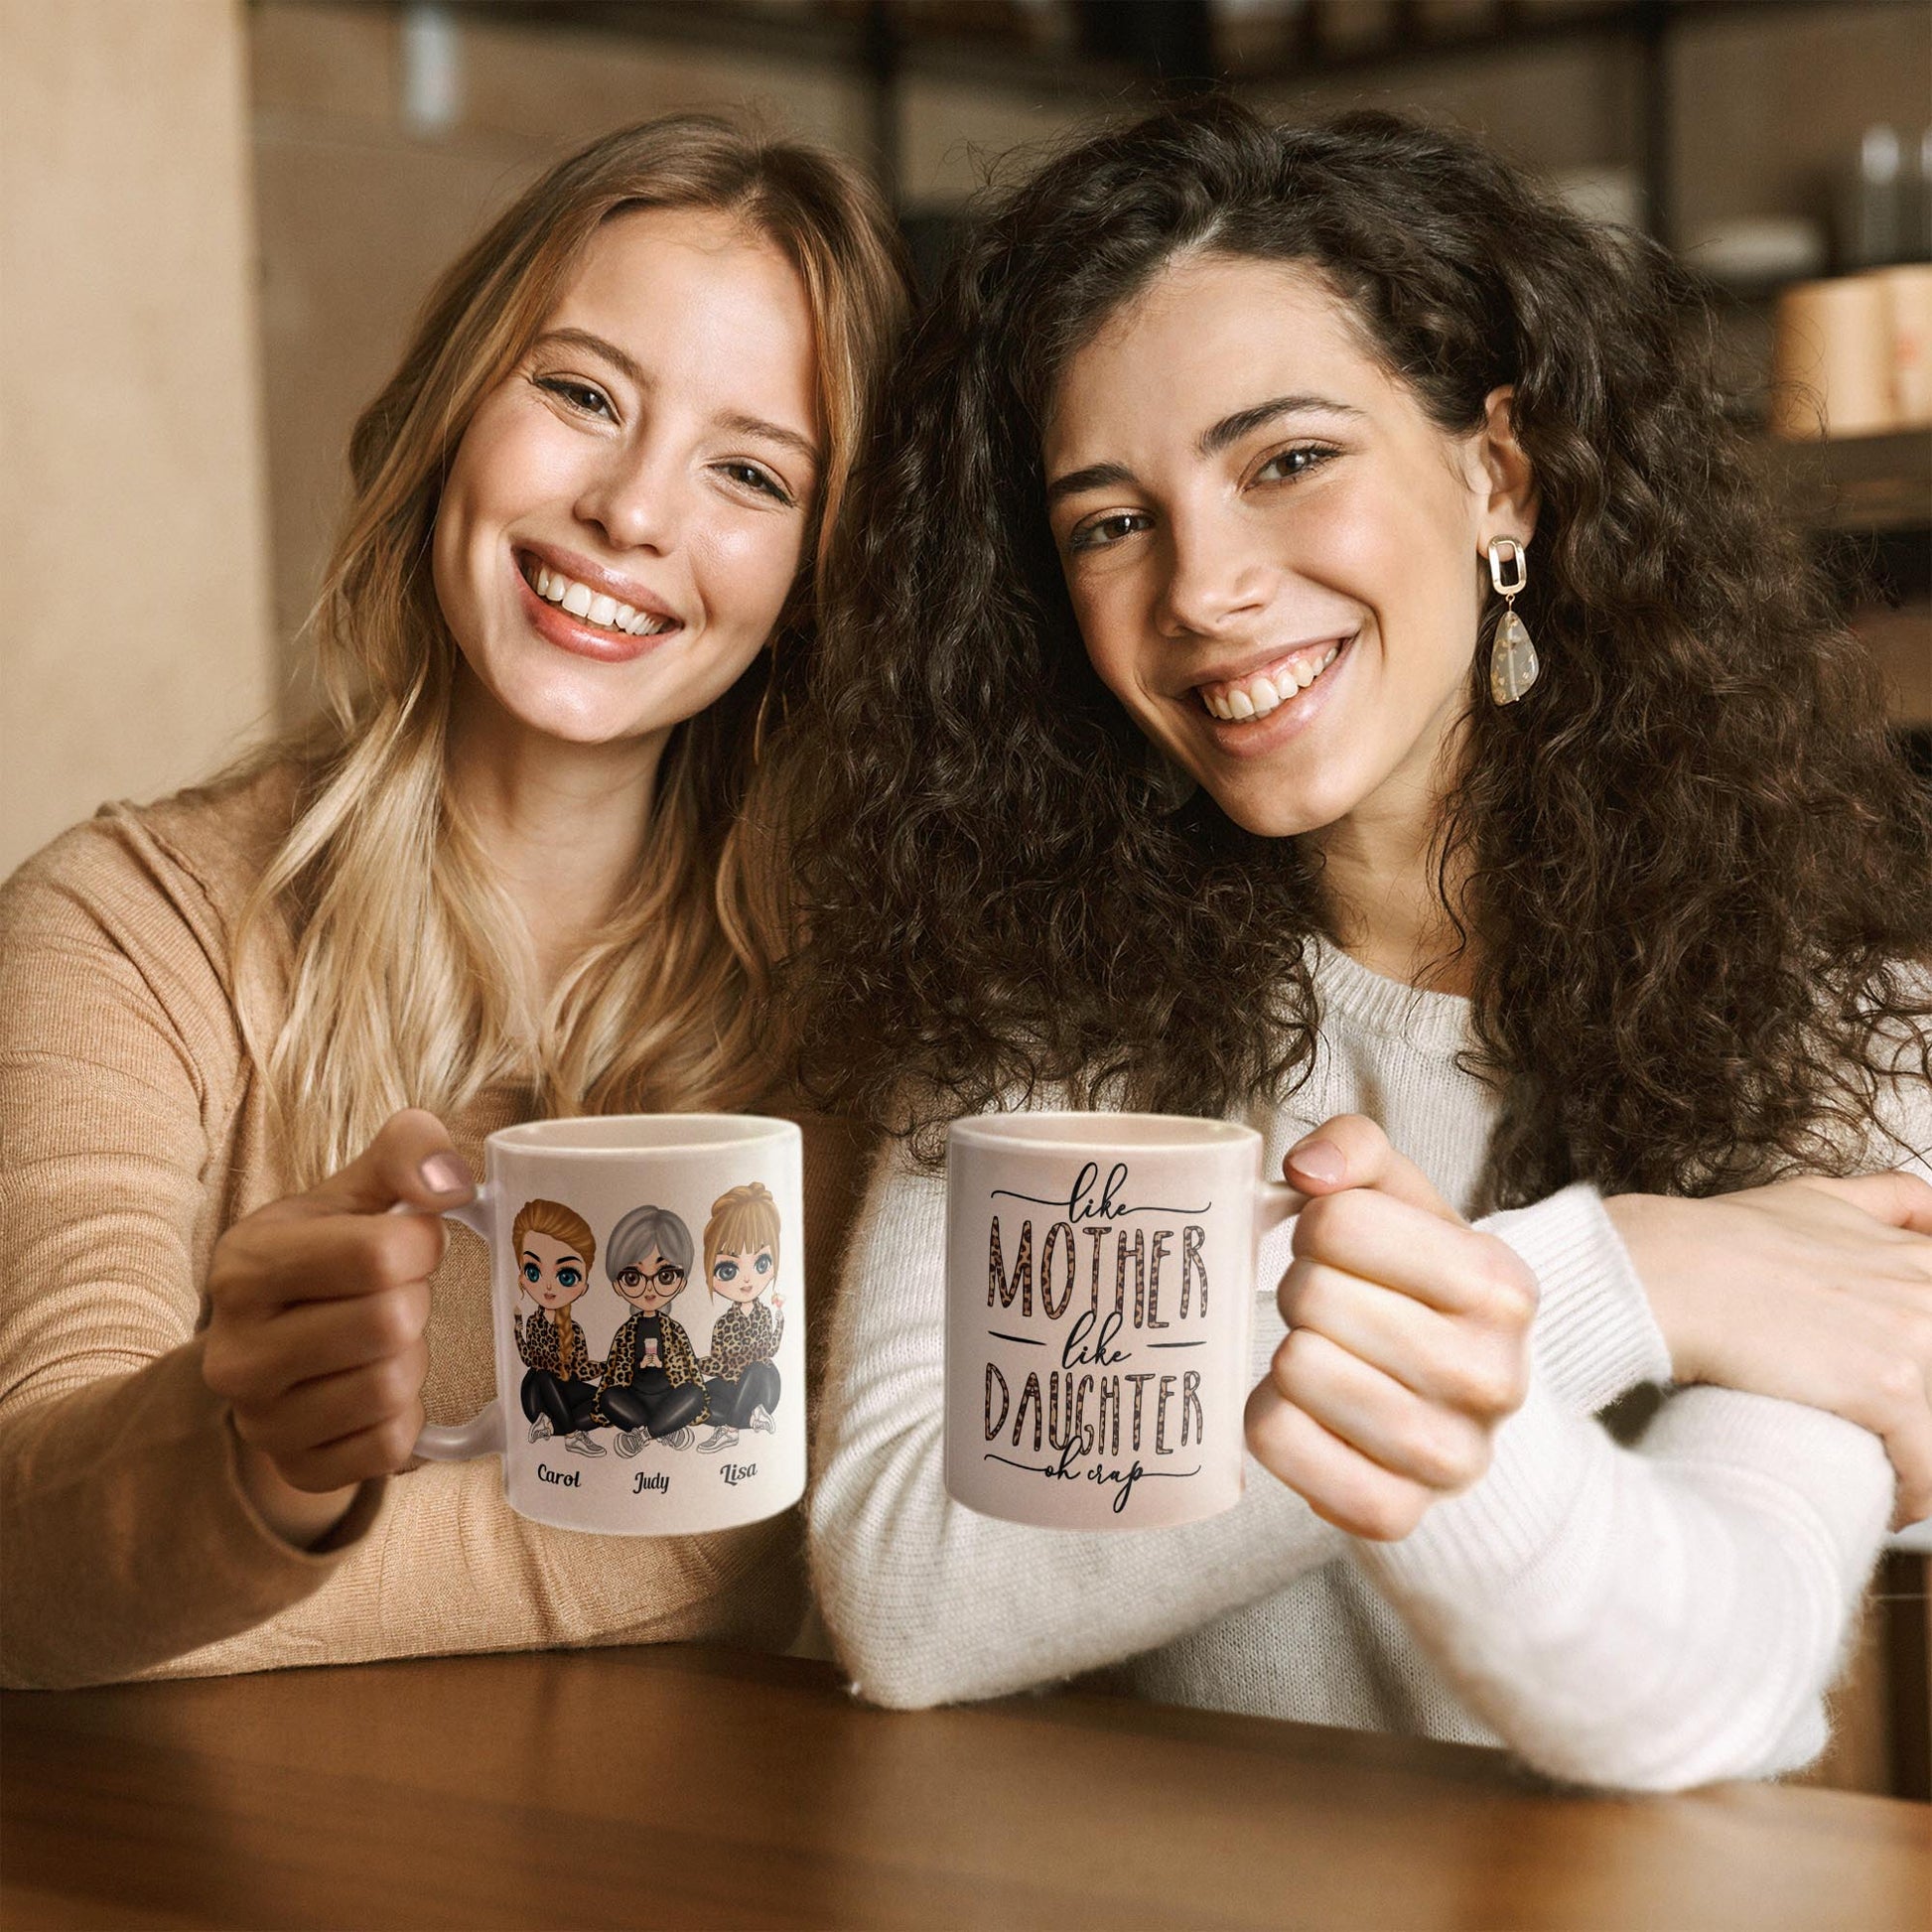 https://macorner.co/cdn/shop/products/Like-Mother-Like-Daughter-Oh-Crap-Leopard-Design--Personalized-Mug-Birthday-Gift-For-Mother-Mom-Daughter-Chibi-Girls-_1_2b8666d6-4cfe-4648-9ad3-003189a27b7a.jpg?v=1643187773&width=1946